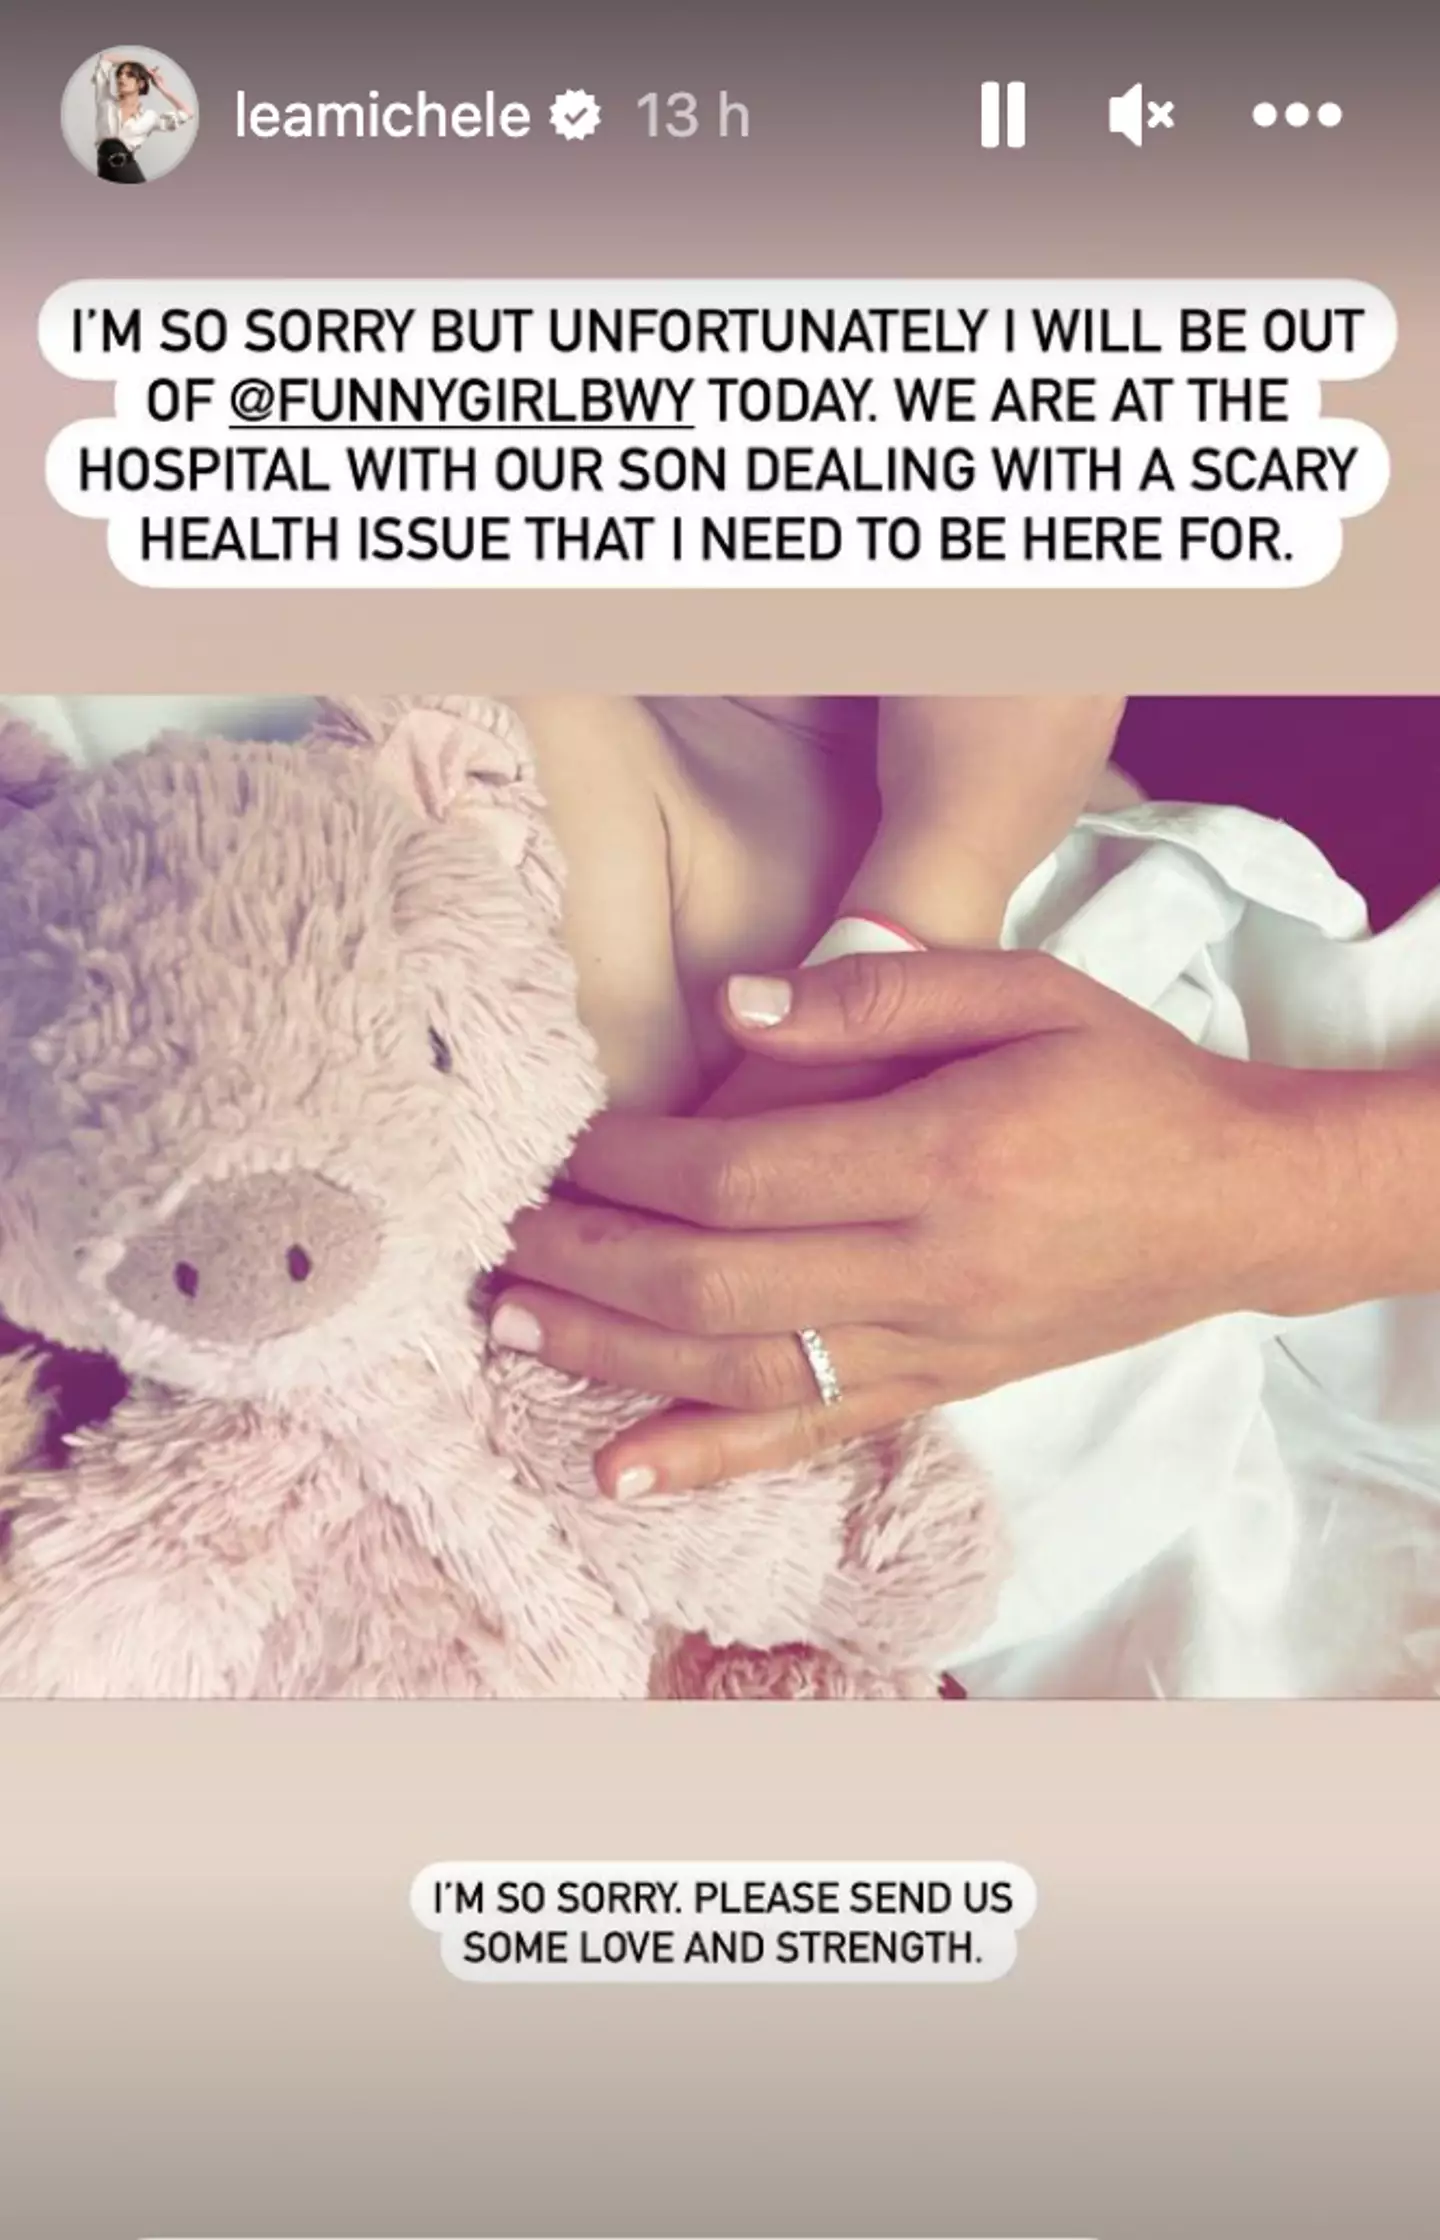 The mum shared a snap of her son in hospital.